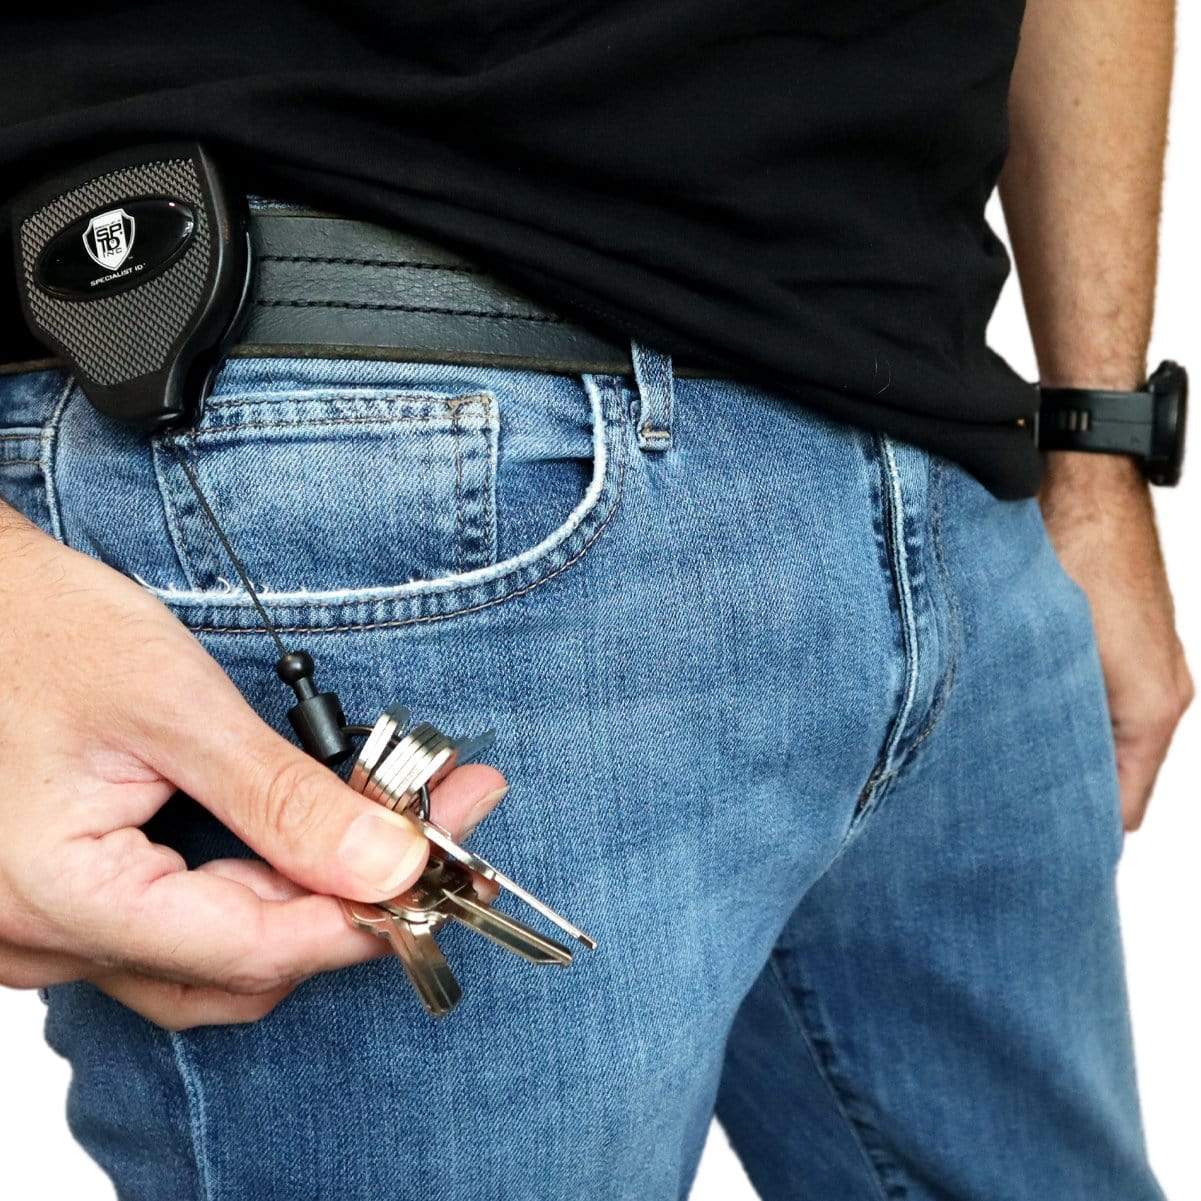 Heavy Duty Badge Reel with Badge Holder & Key Ring - Carabiner Retractable  Keychain Lanyard with Strong Kevlar Cord, Card Strap & Belt Loop Clip by